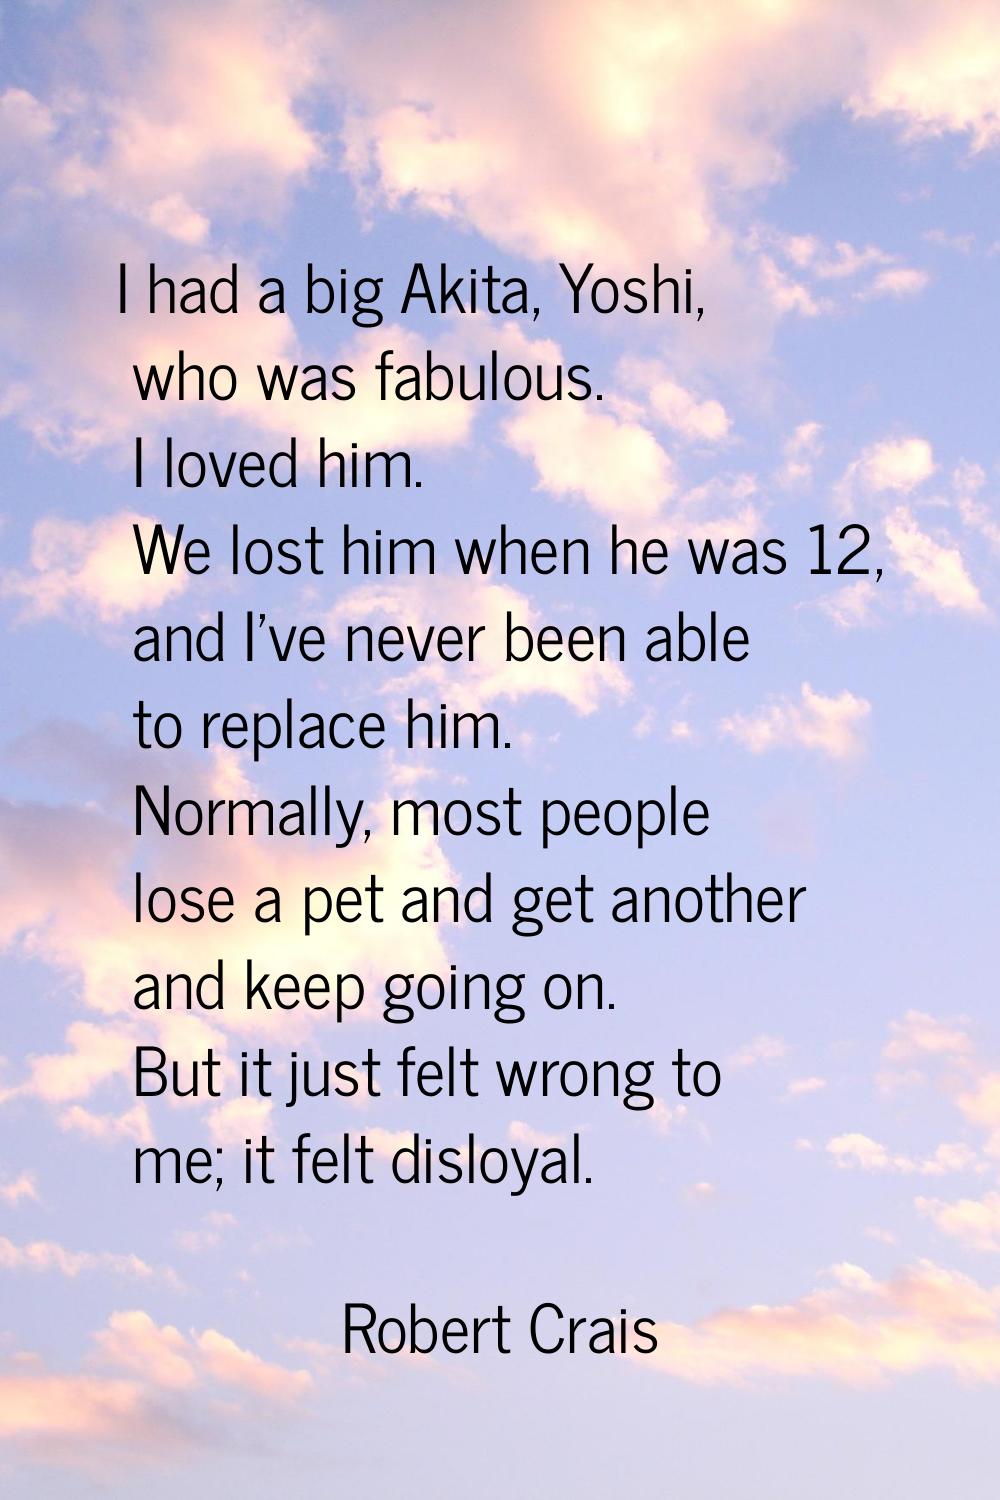 I had a big Akita, Yoshi, who was fabulous. I loved him. We lost him when he was 12, and I've never